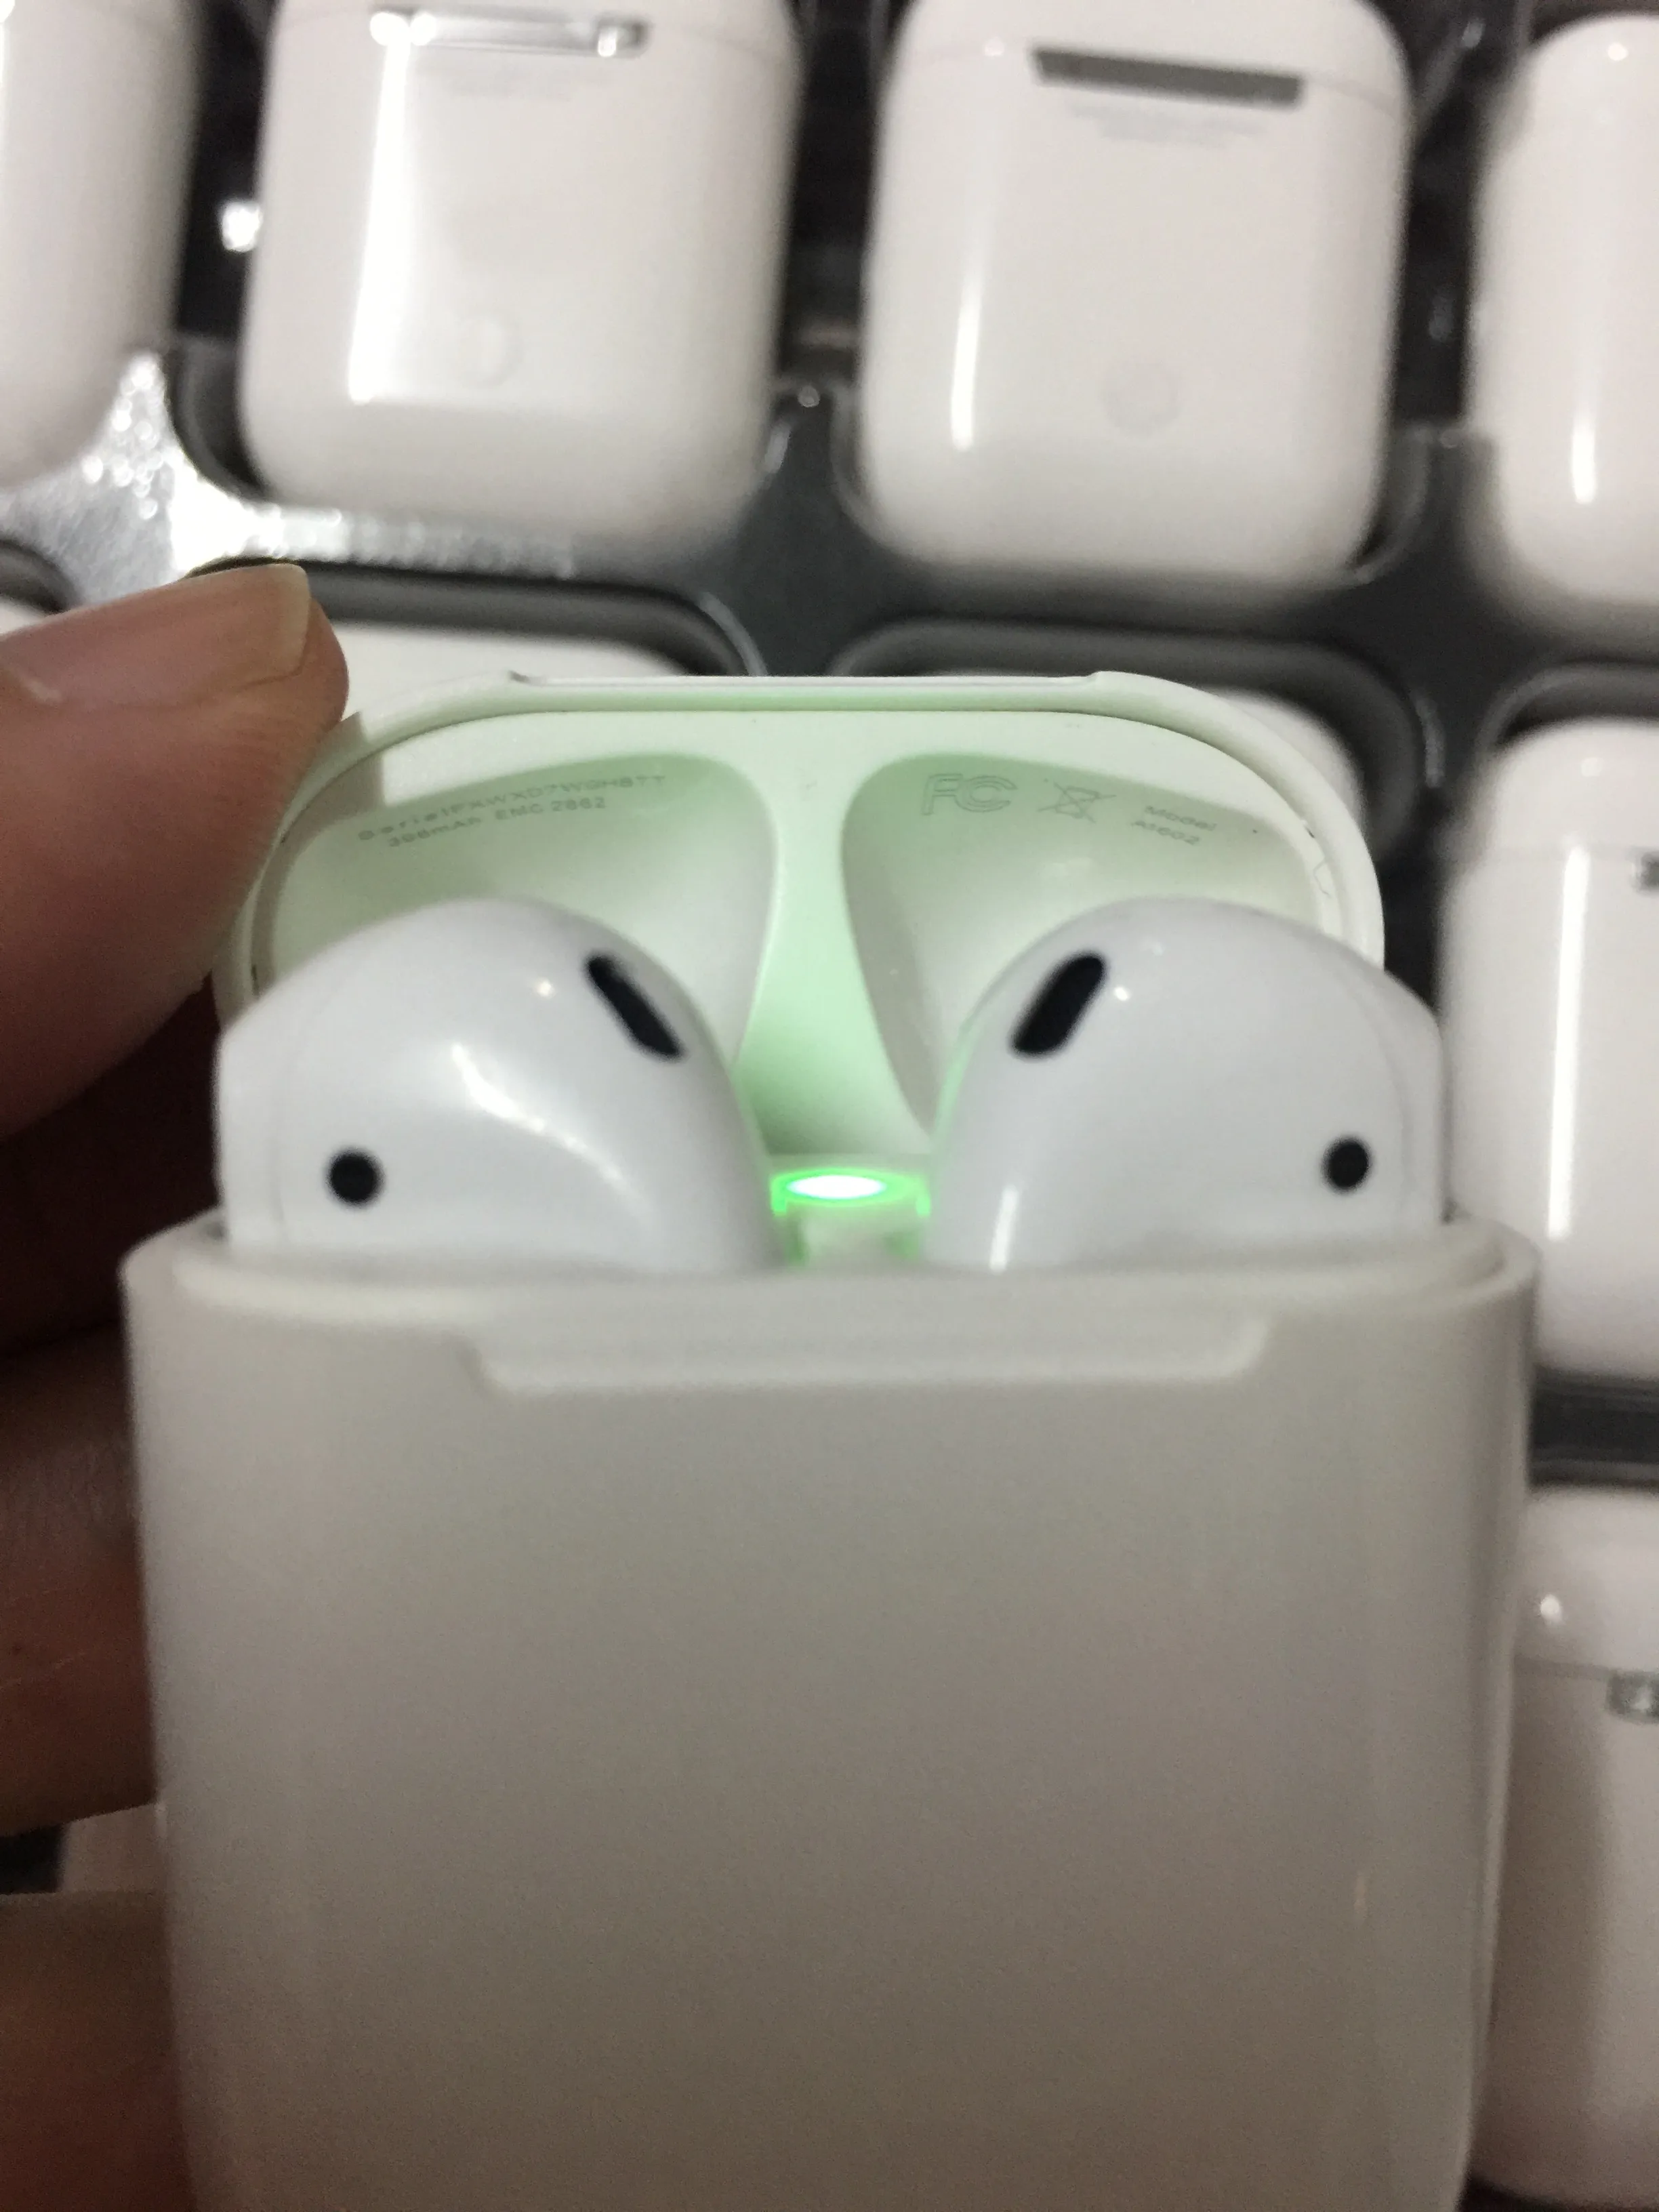 modbydeligt sagtmodighed saltet Anniv Coupon Below] Supercopy Airpods Wireless Bluetooth Earphone Earbuds  For 1:1 In Ear Earphone Deeper Bass With Touch Function For IOS Android  With Logo From Dhgatefactory2019, $45.23 | DHgate.Com